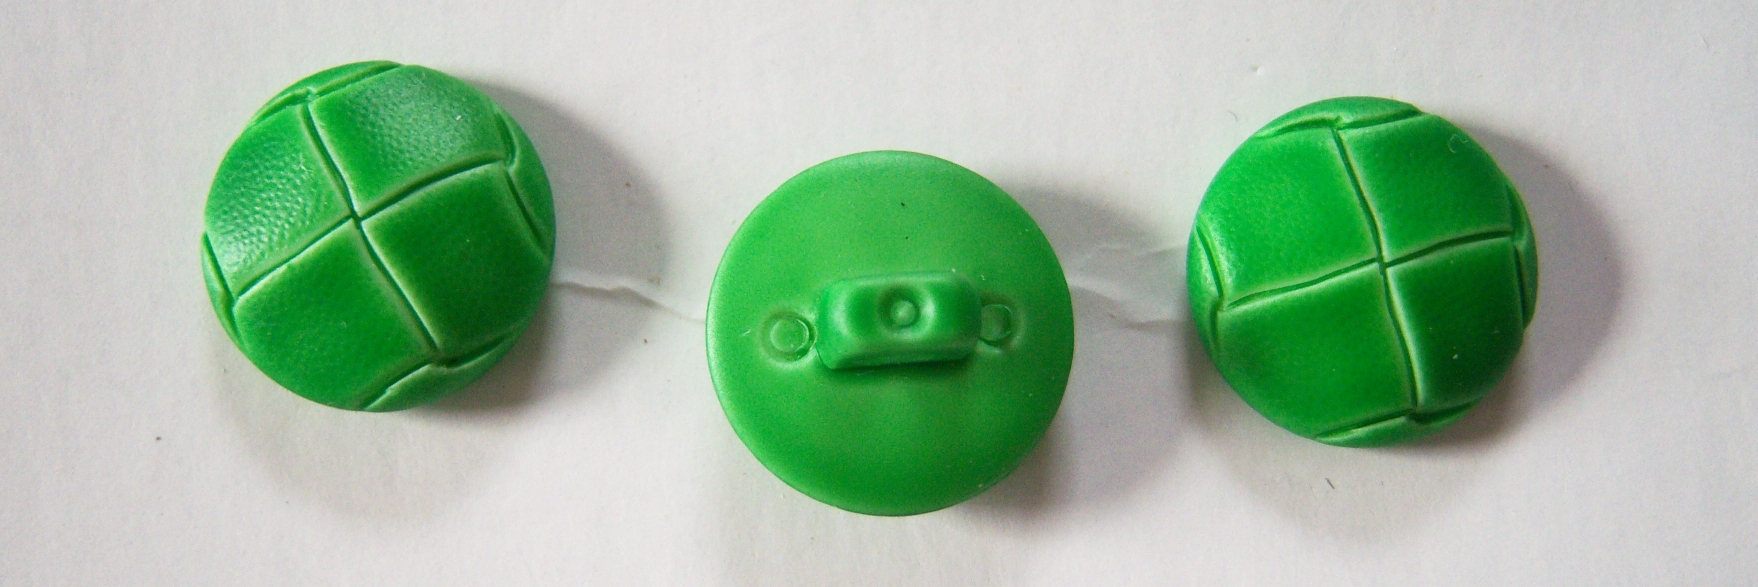 Br Green Faux Leather 5/8" Shank Poly Button